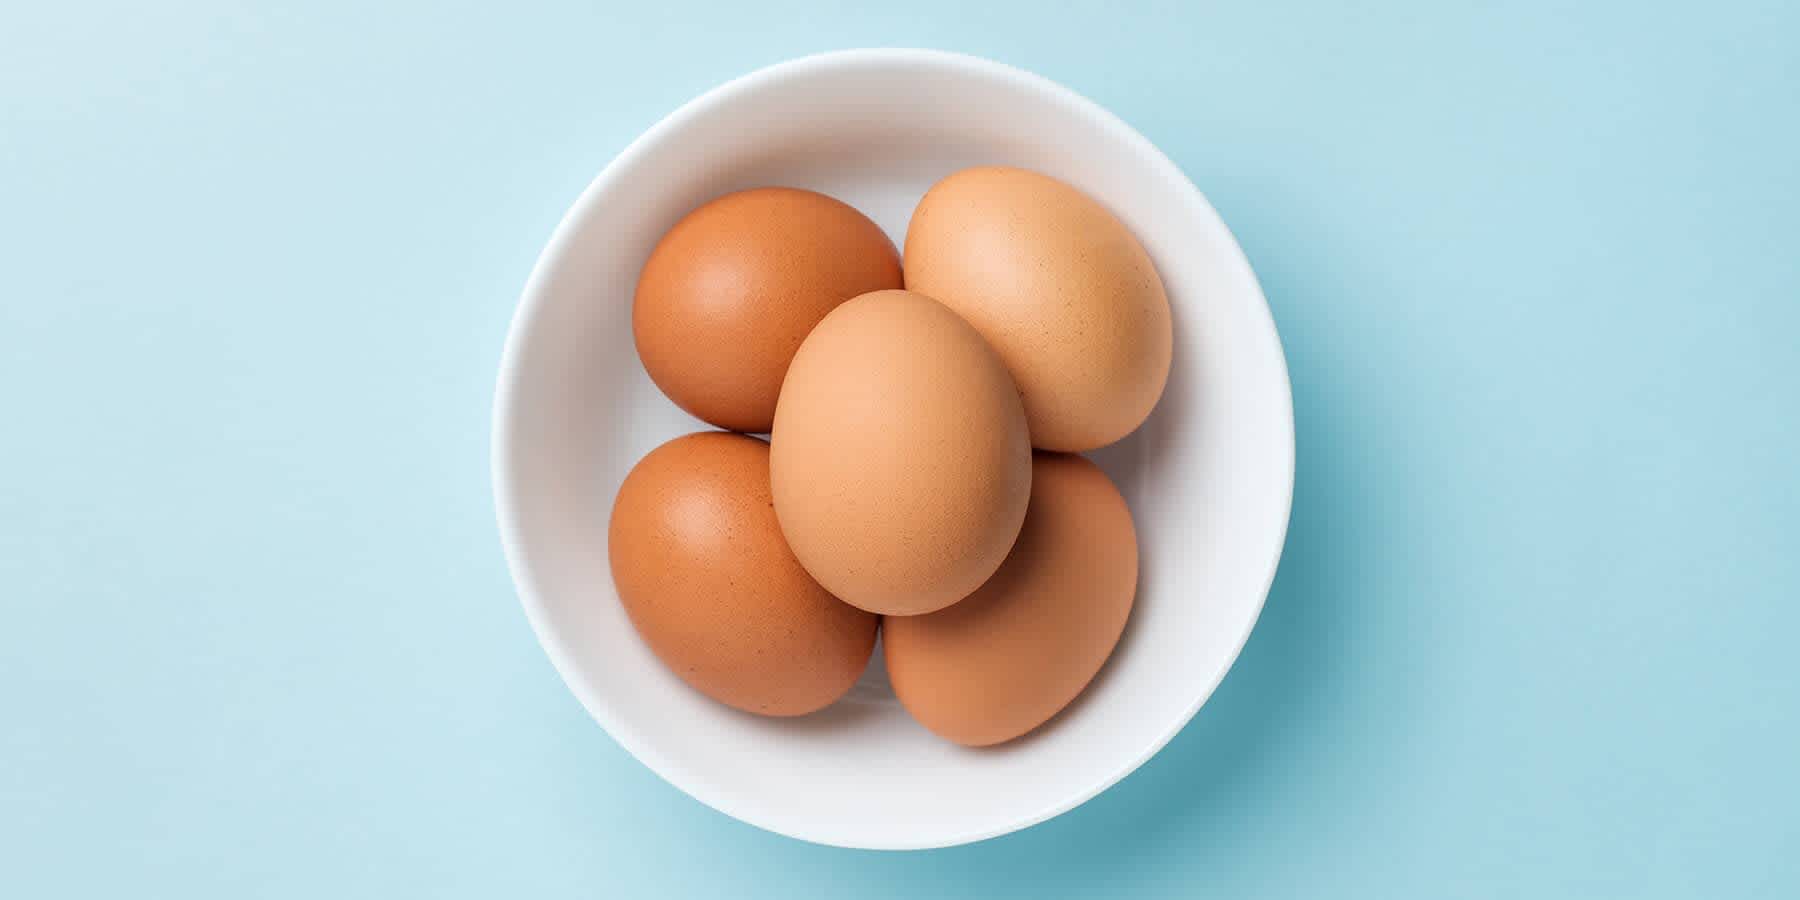 Eggs in a bowl as an example of food for a keto diet